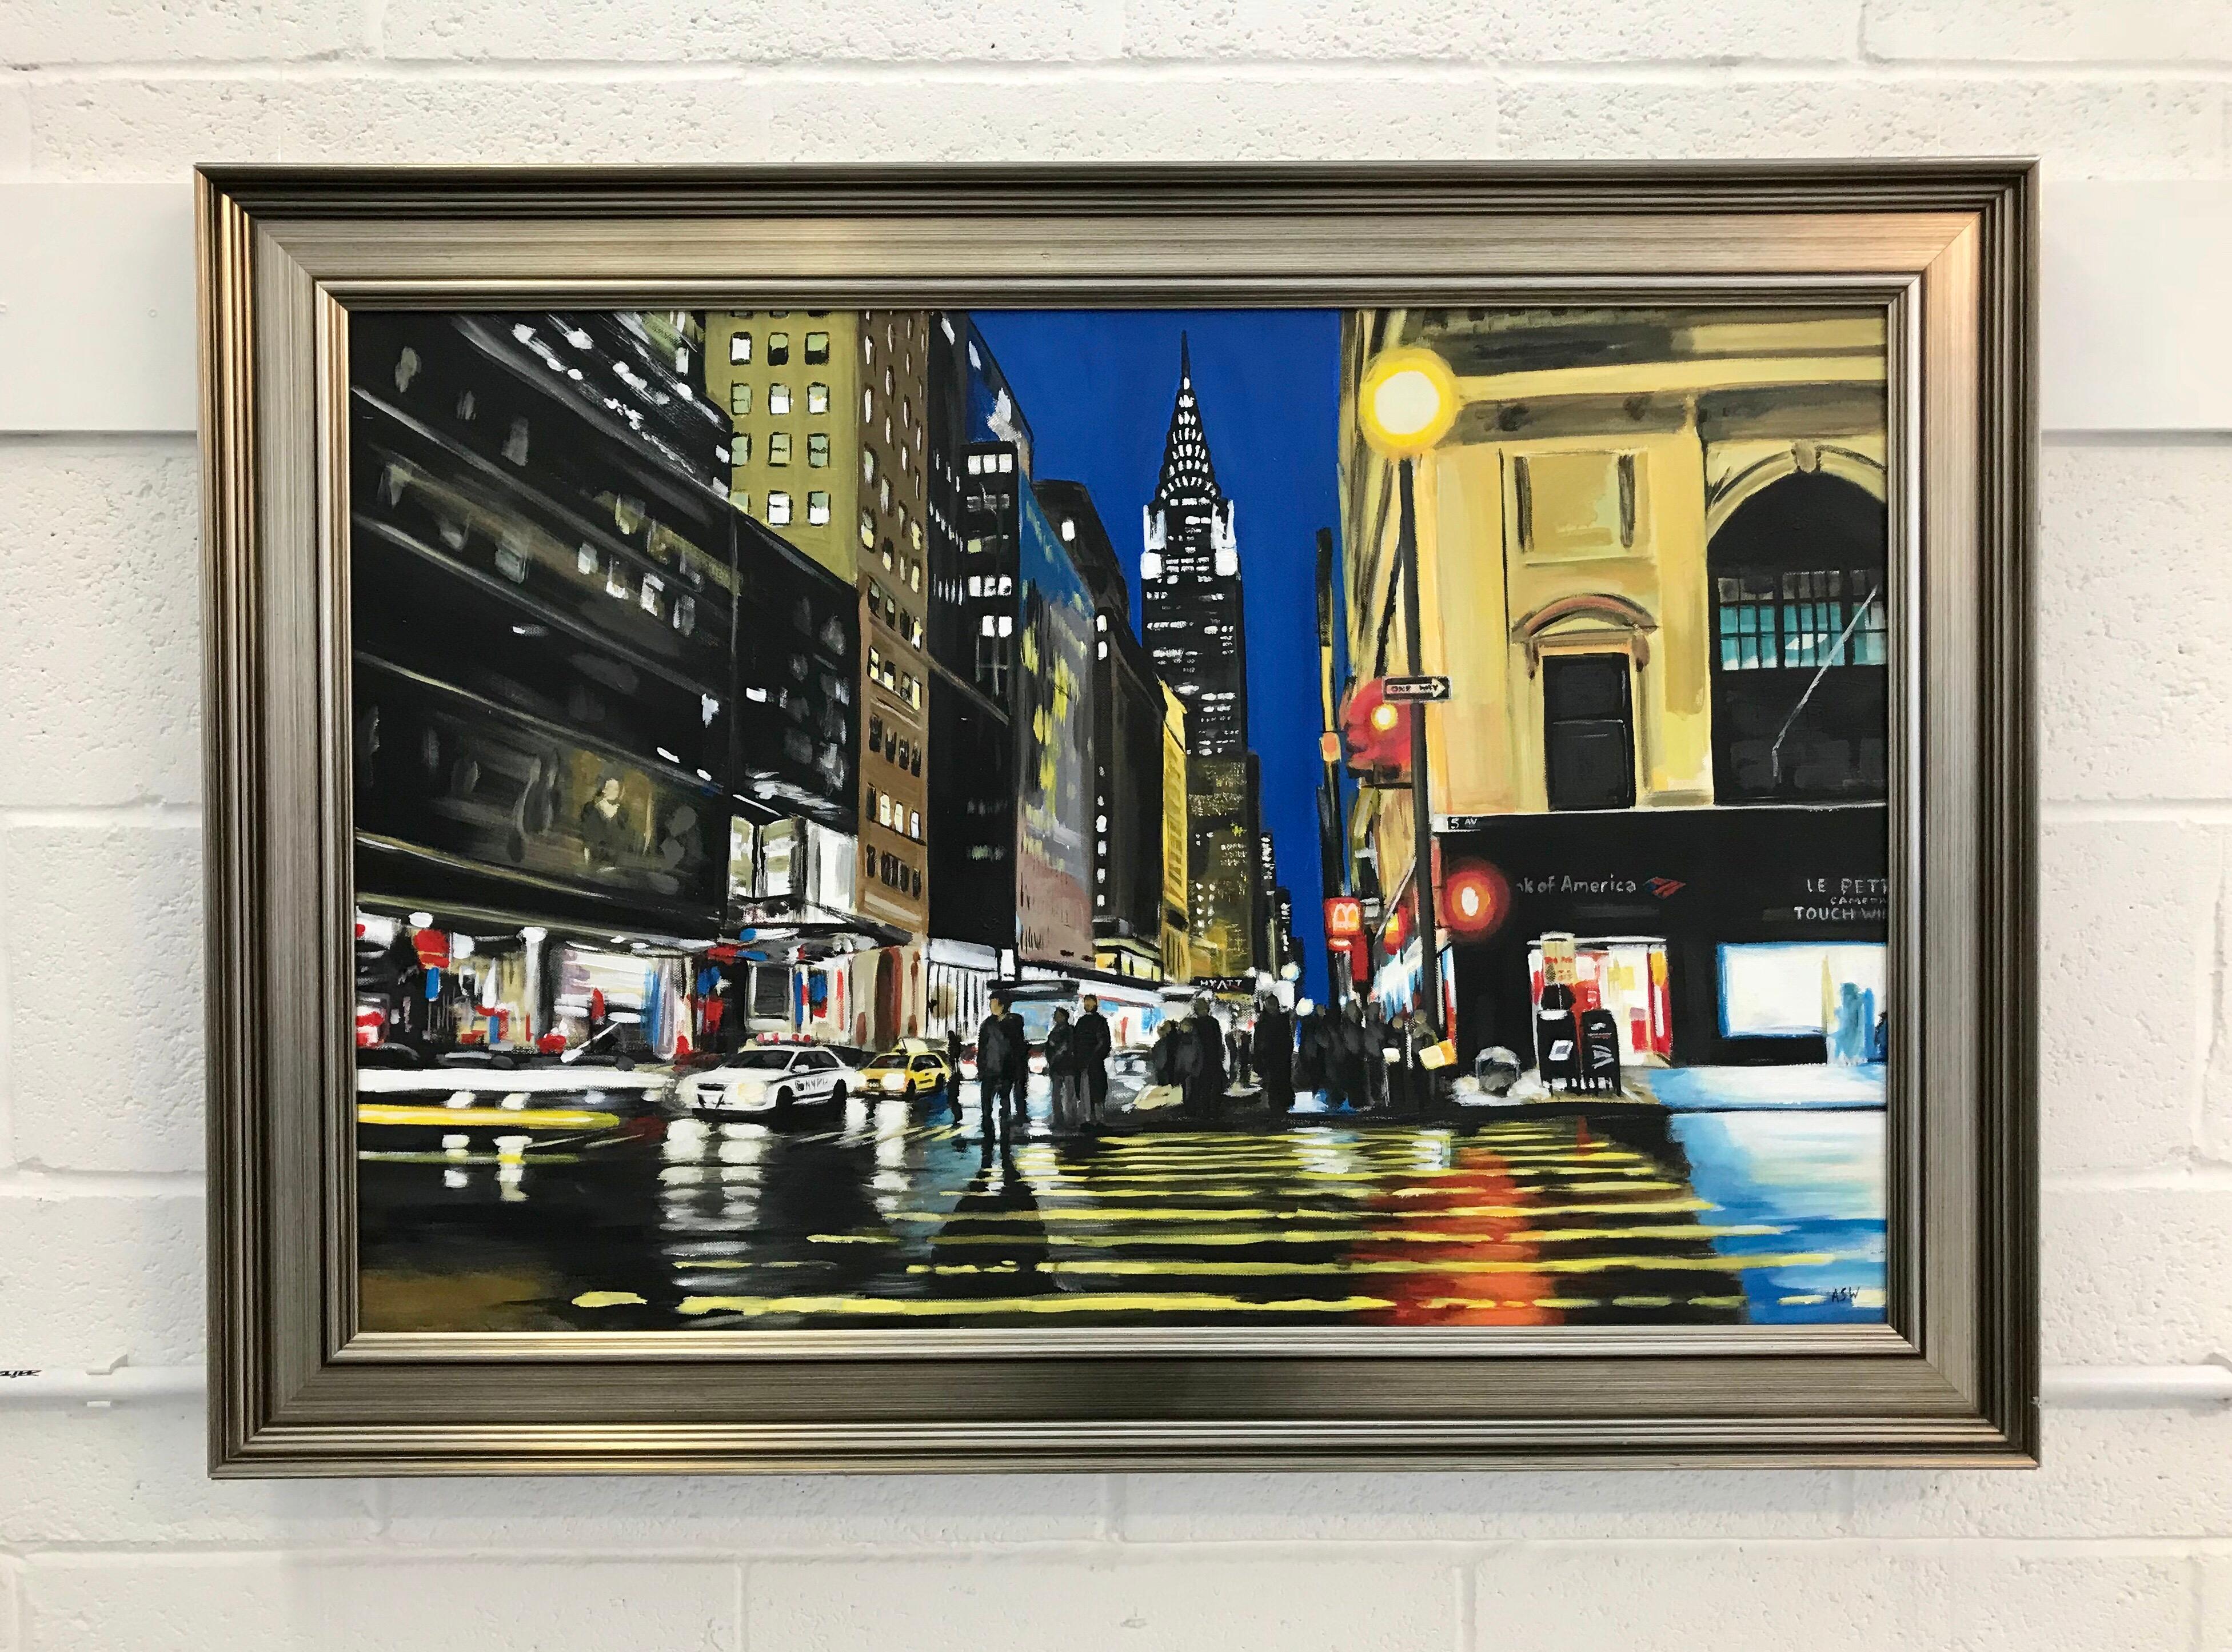 Painting of Chrysler Building New York City by Collectible British Urban Artist - Black Figurative Painting by Angela Wakefield